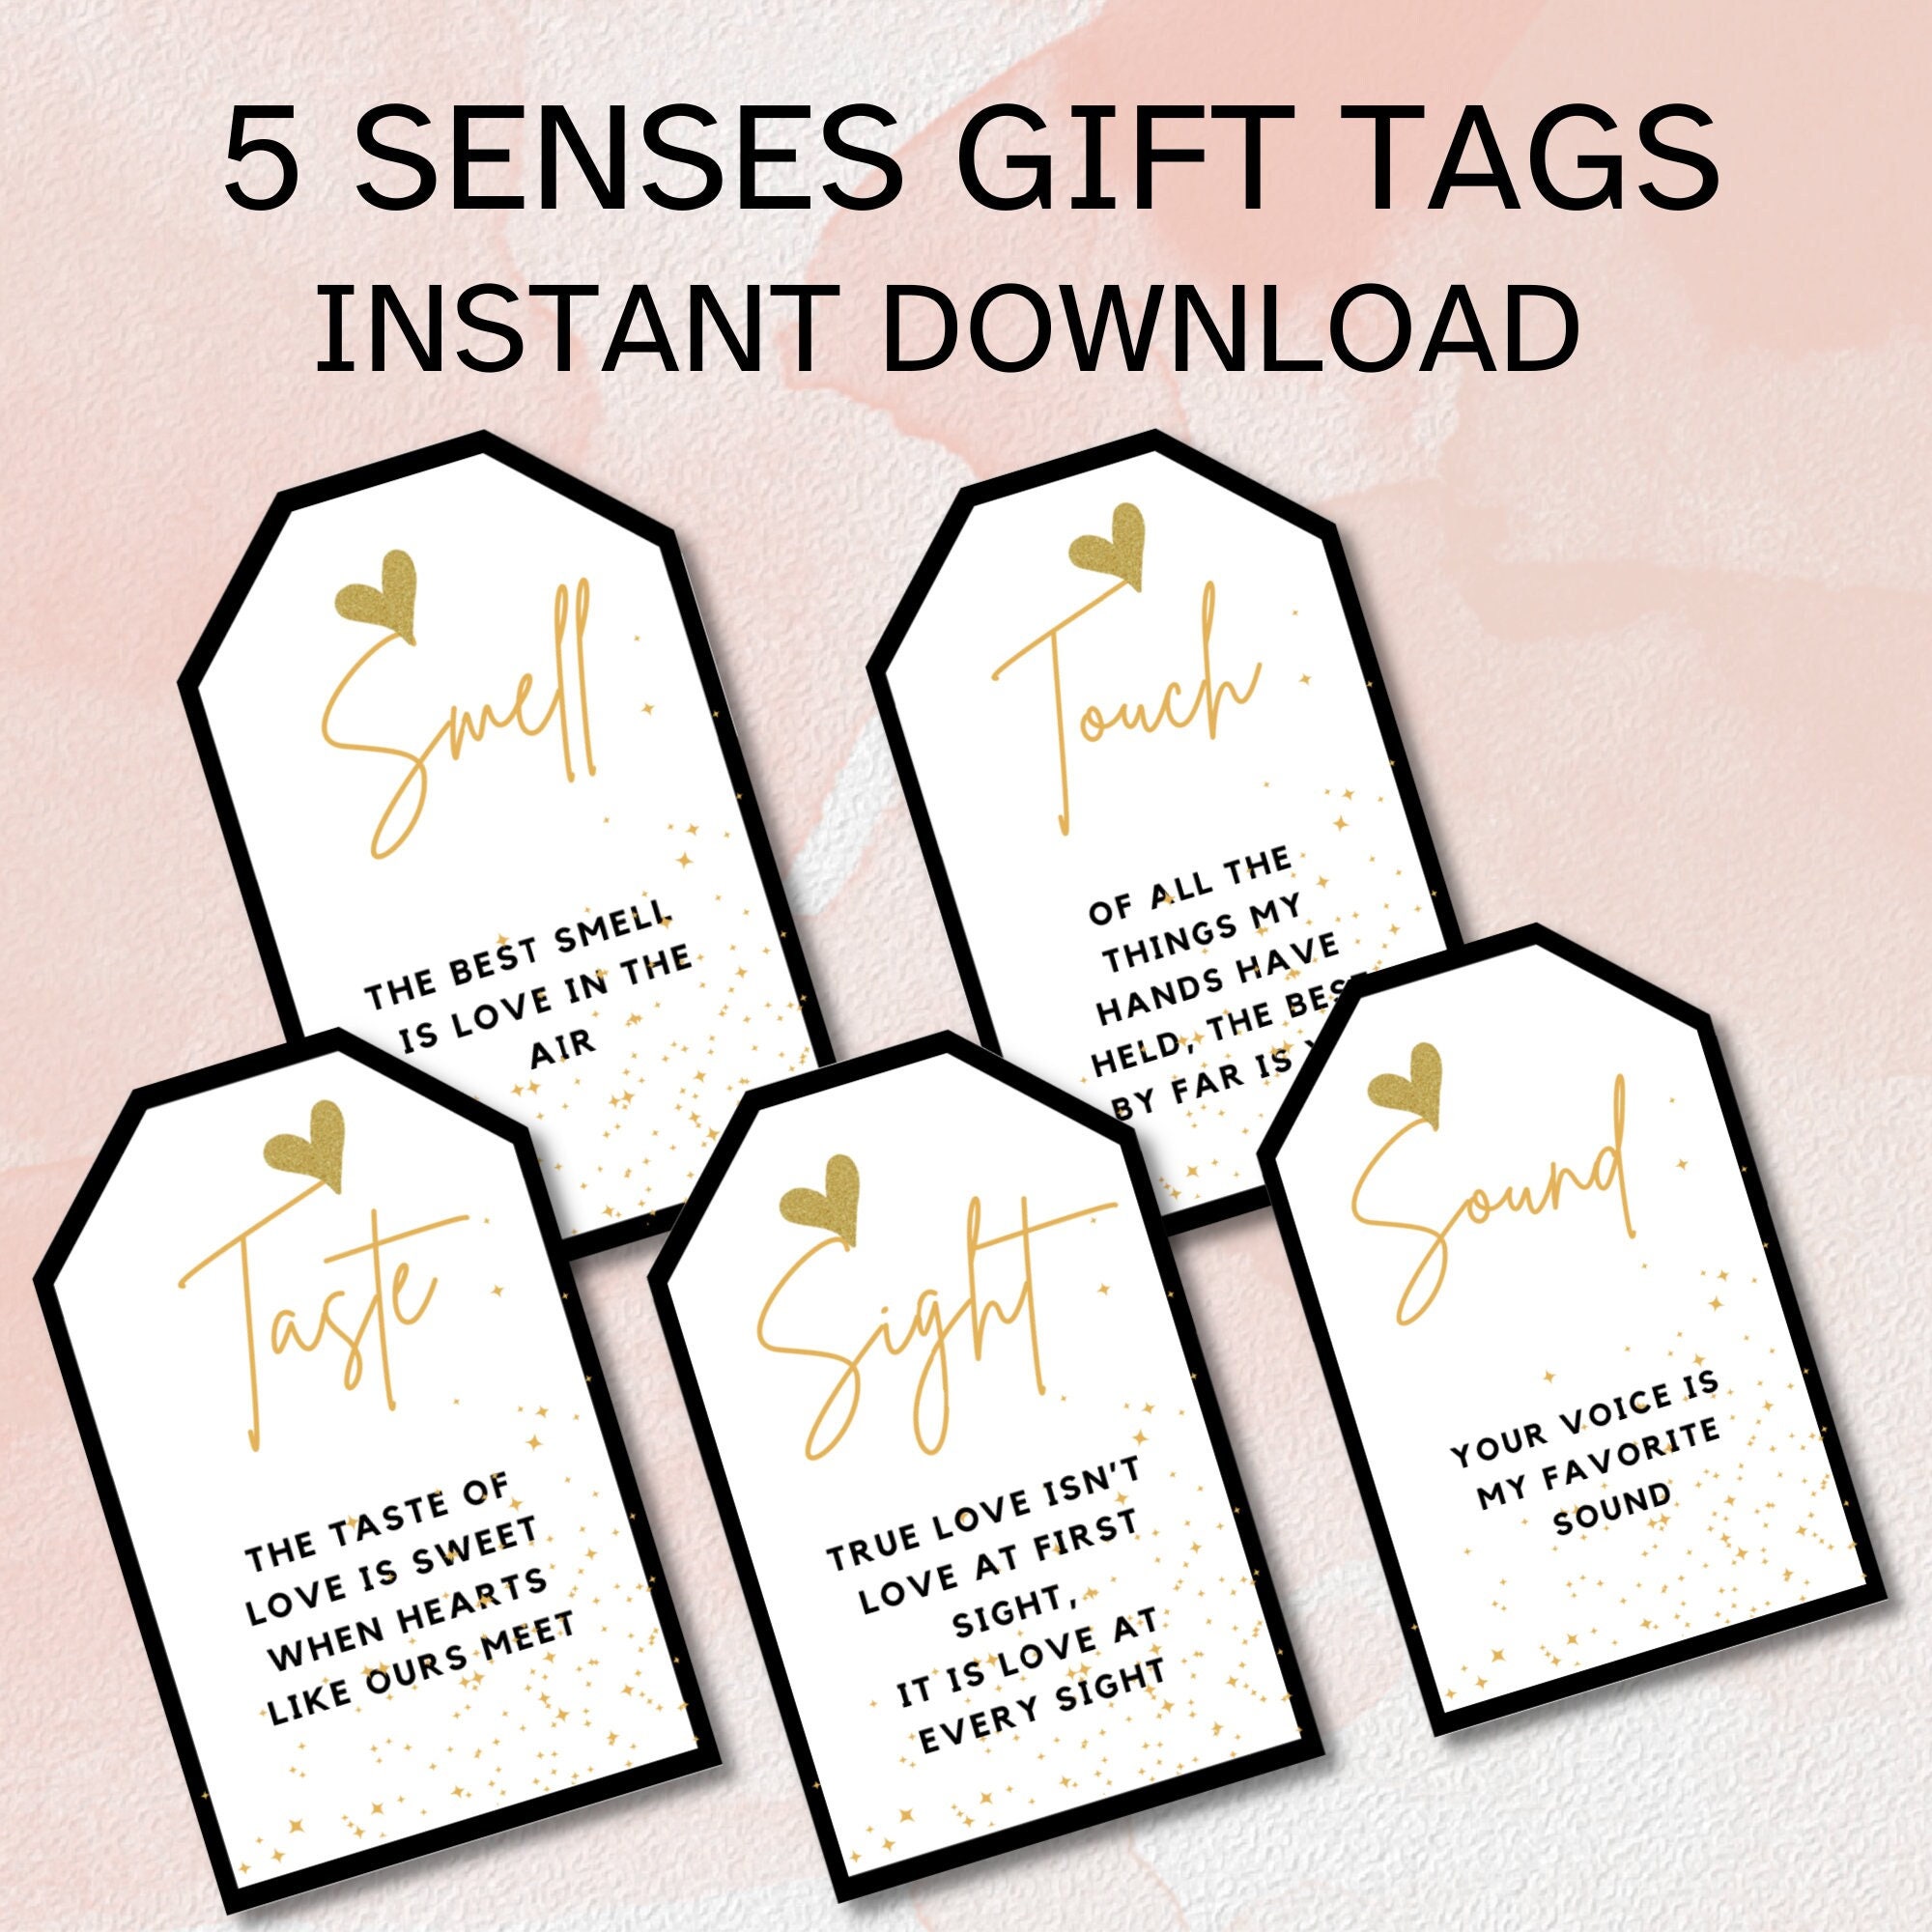 Thoughtful 5 Senses Gift Ideas for Someone Special - Anynee